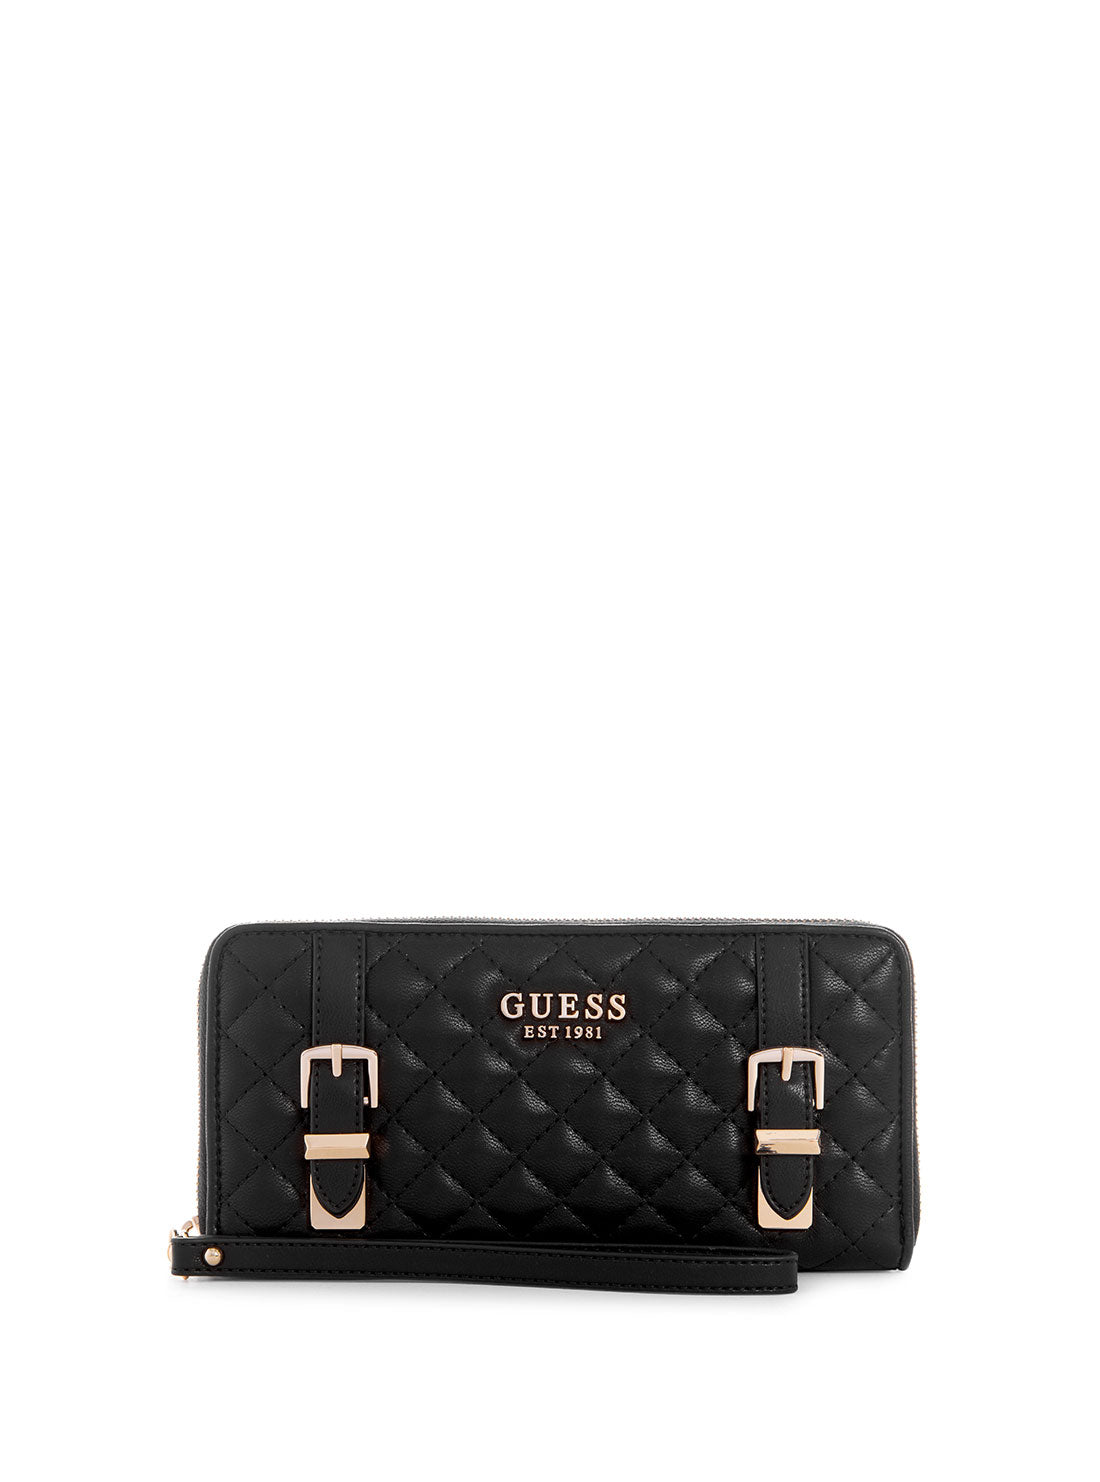 GUESS Women's Black Adam Quiled Large Wallet QG869446 Front View